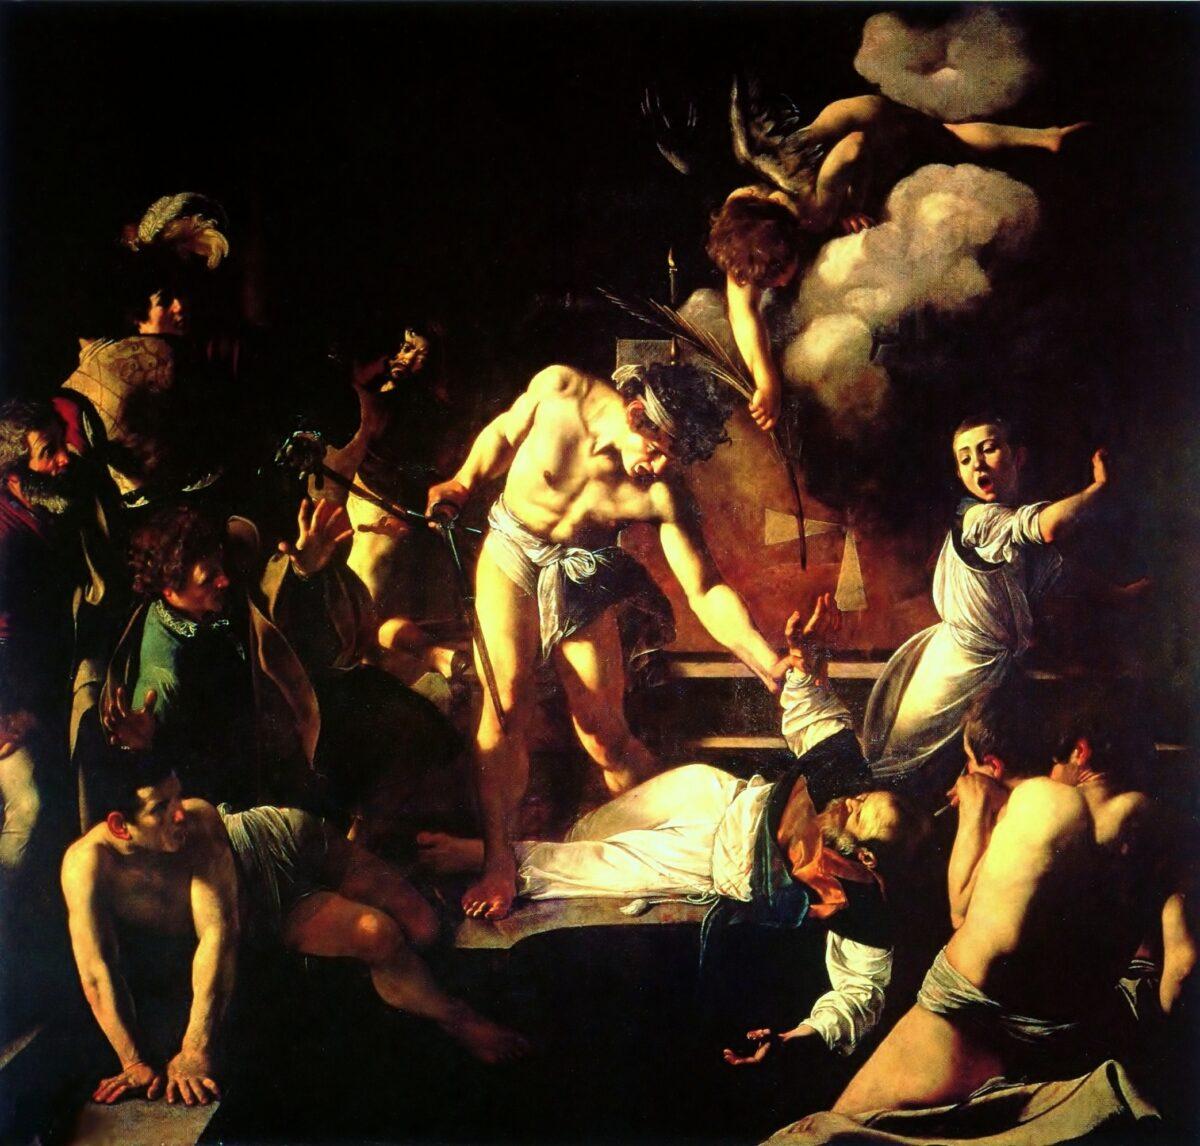 “The Martyrdom of Saint Matthew,” circa 1599, by Caravaggio. The Church of St. Louis of the French. (Public Domain)